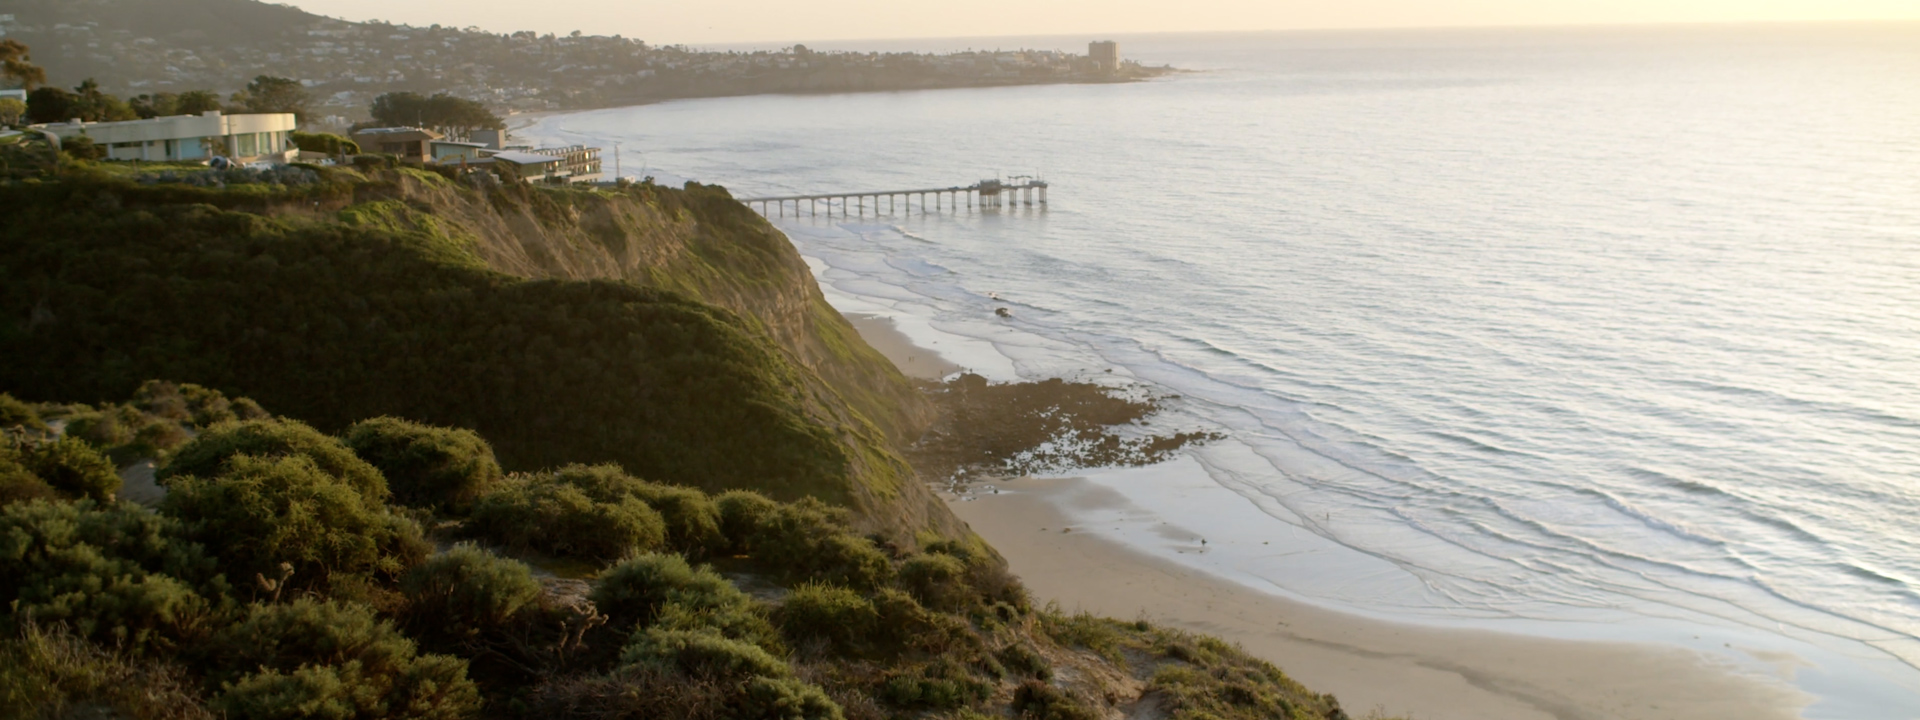 Elevated view of a beach, pier and bluffs at sunset